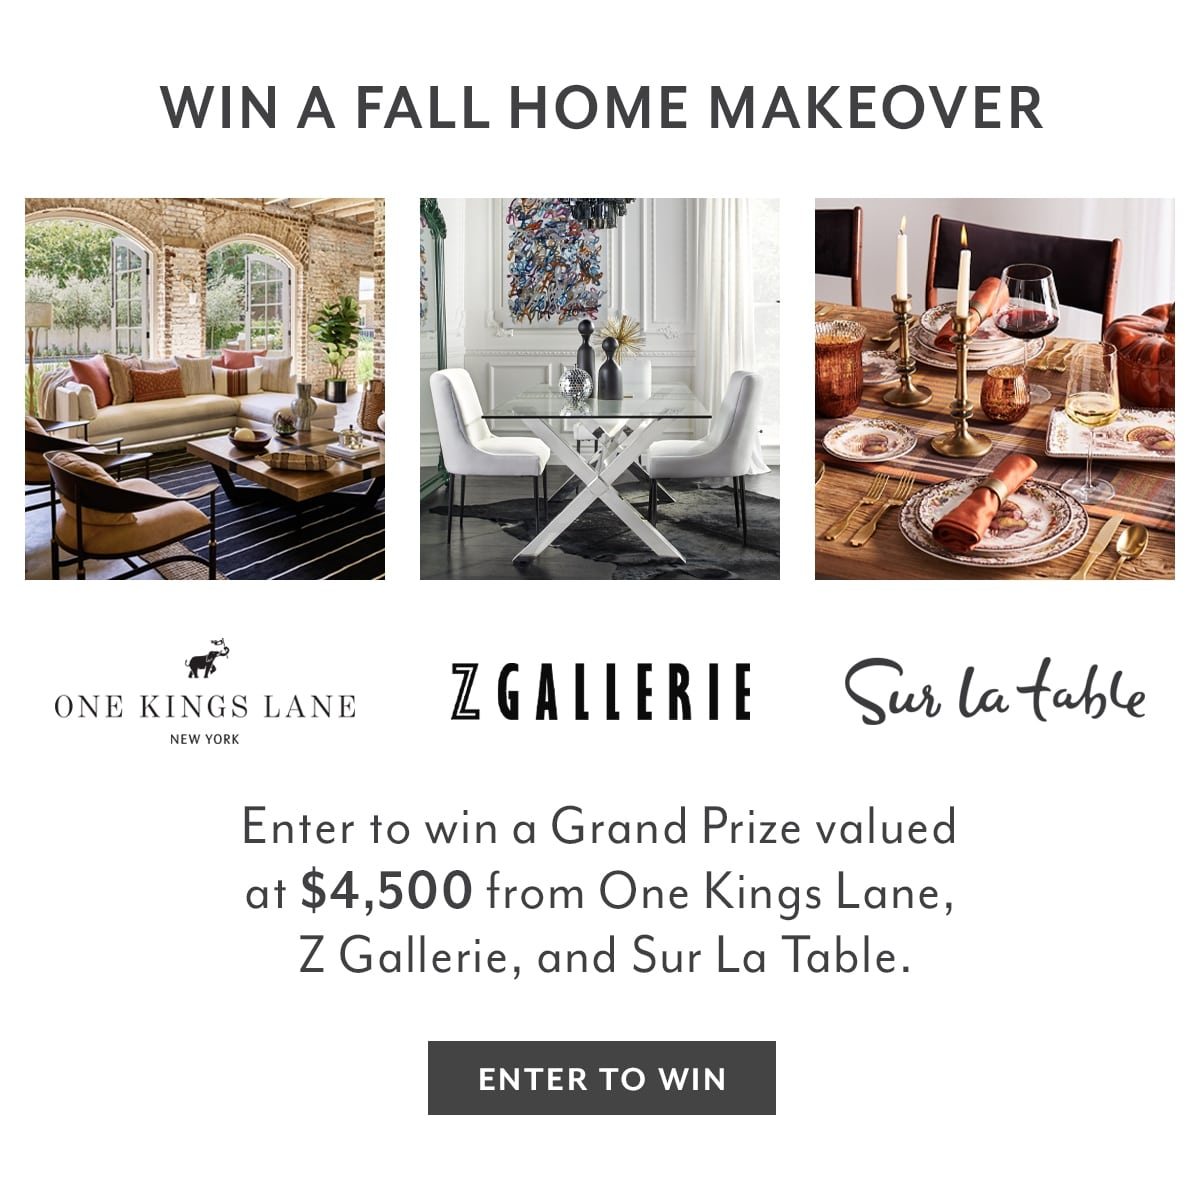 WIN A FALL HOME MAKEOVER